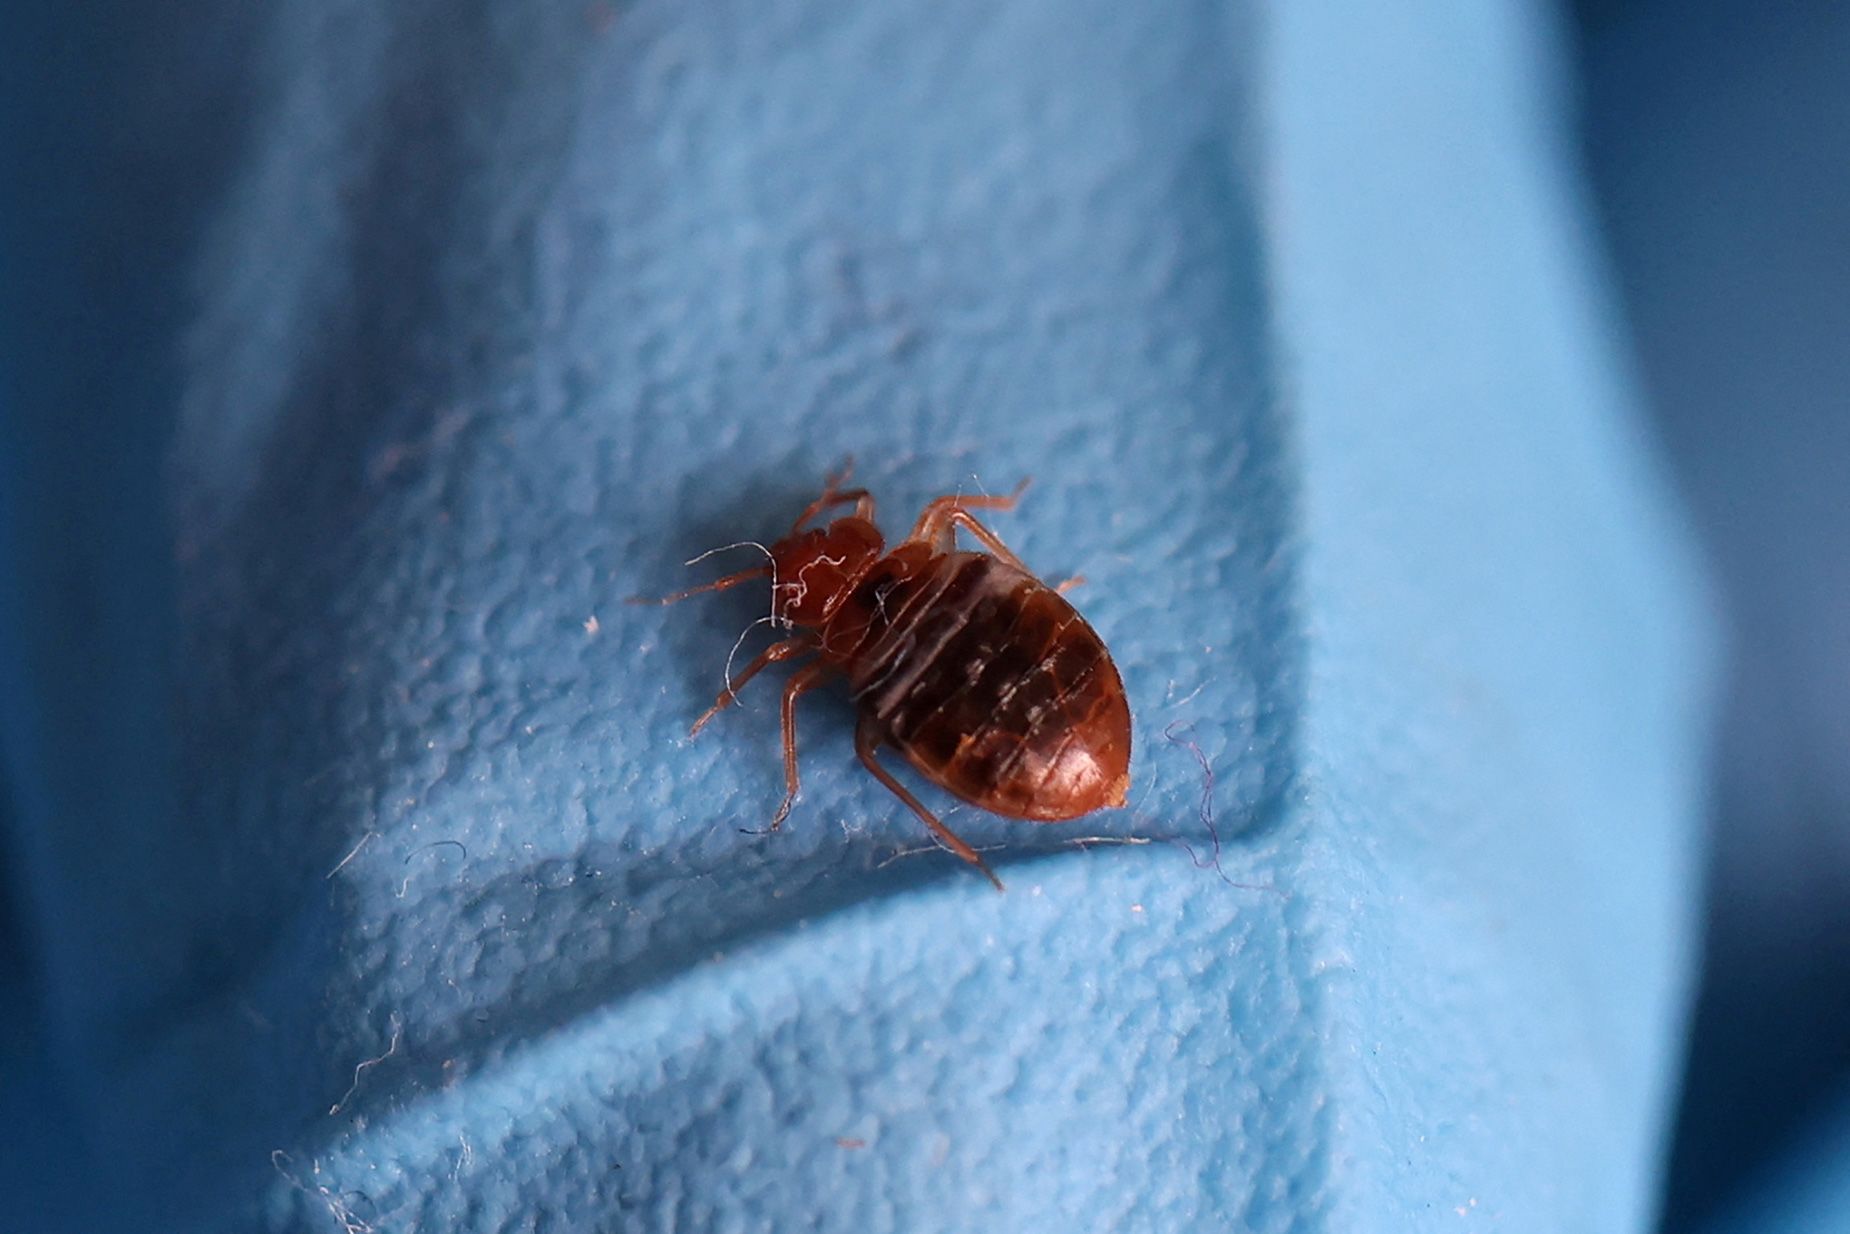 What you need to know about Europe's bedbug panic